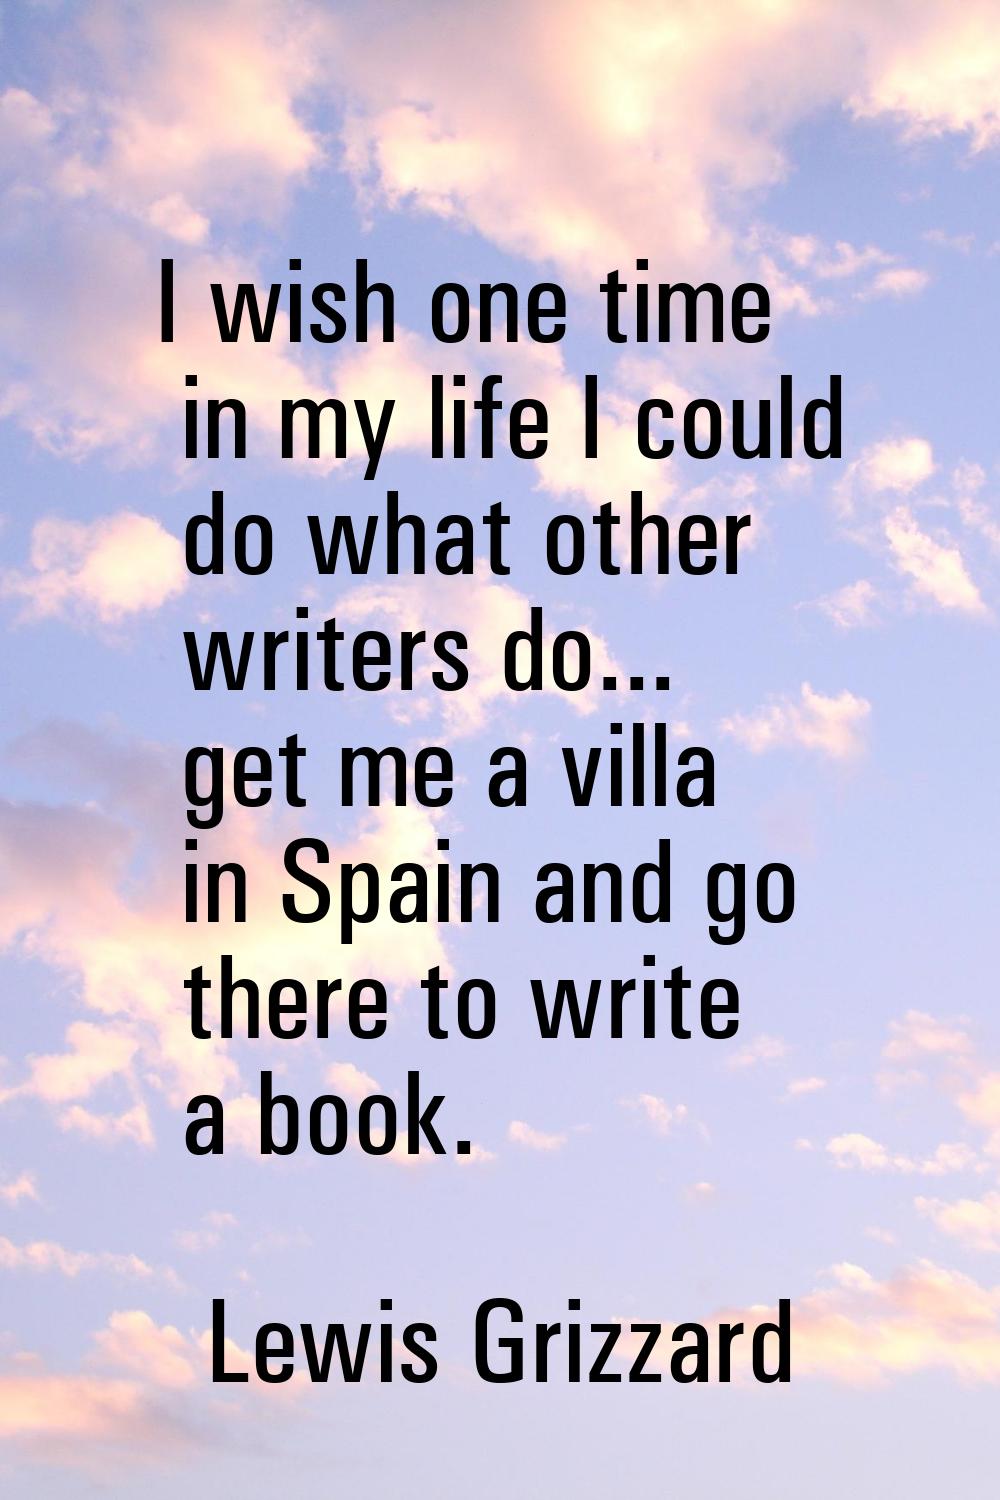 I wish one time in my life I could do what other writers do... get me a villa in Spain and go there